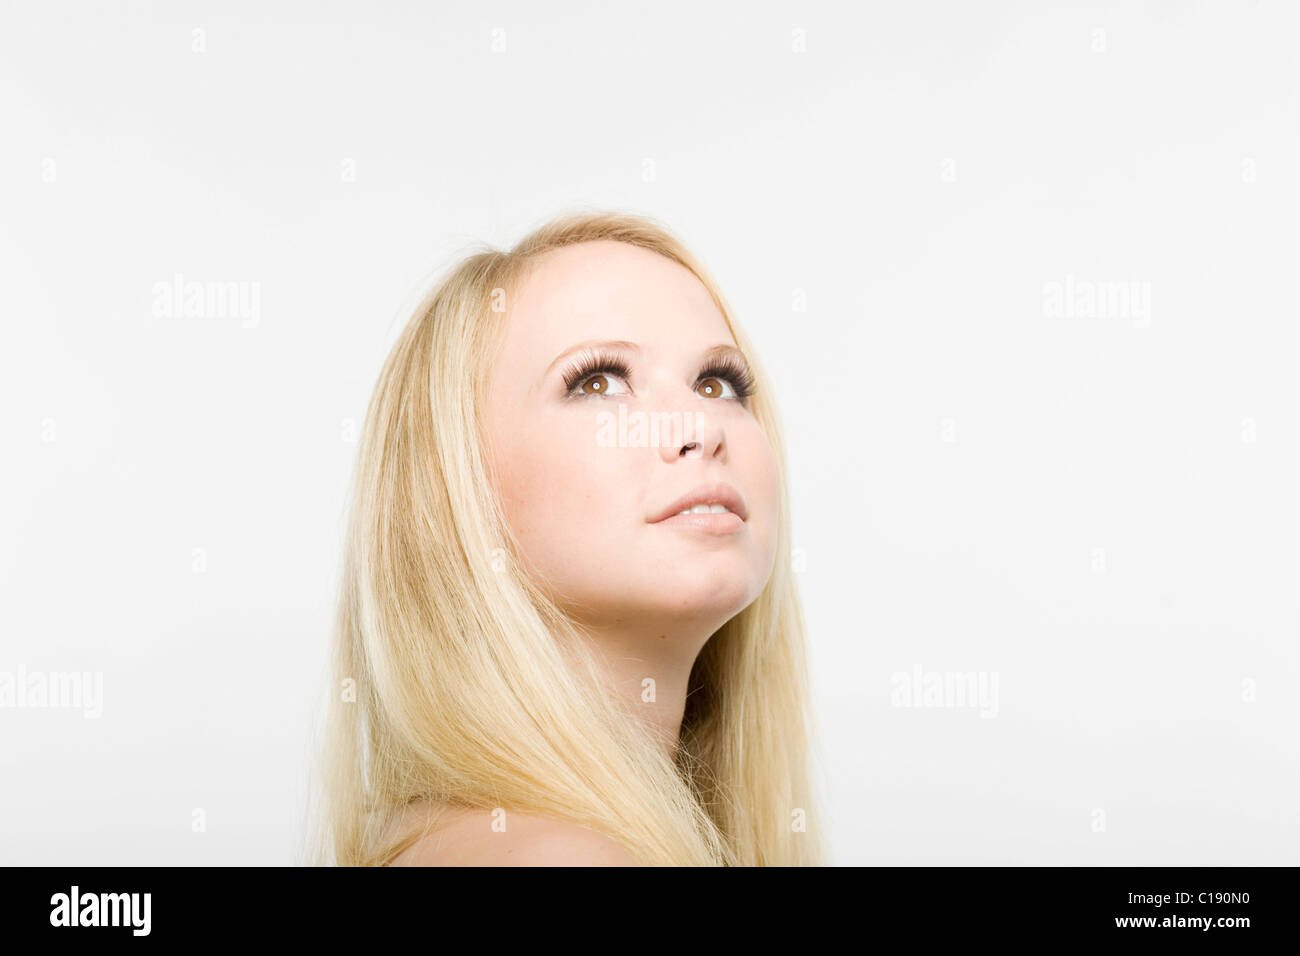 Young blonde woman looking up Stock Photo